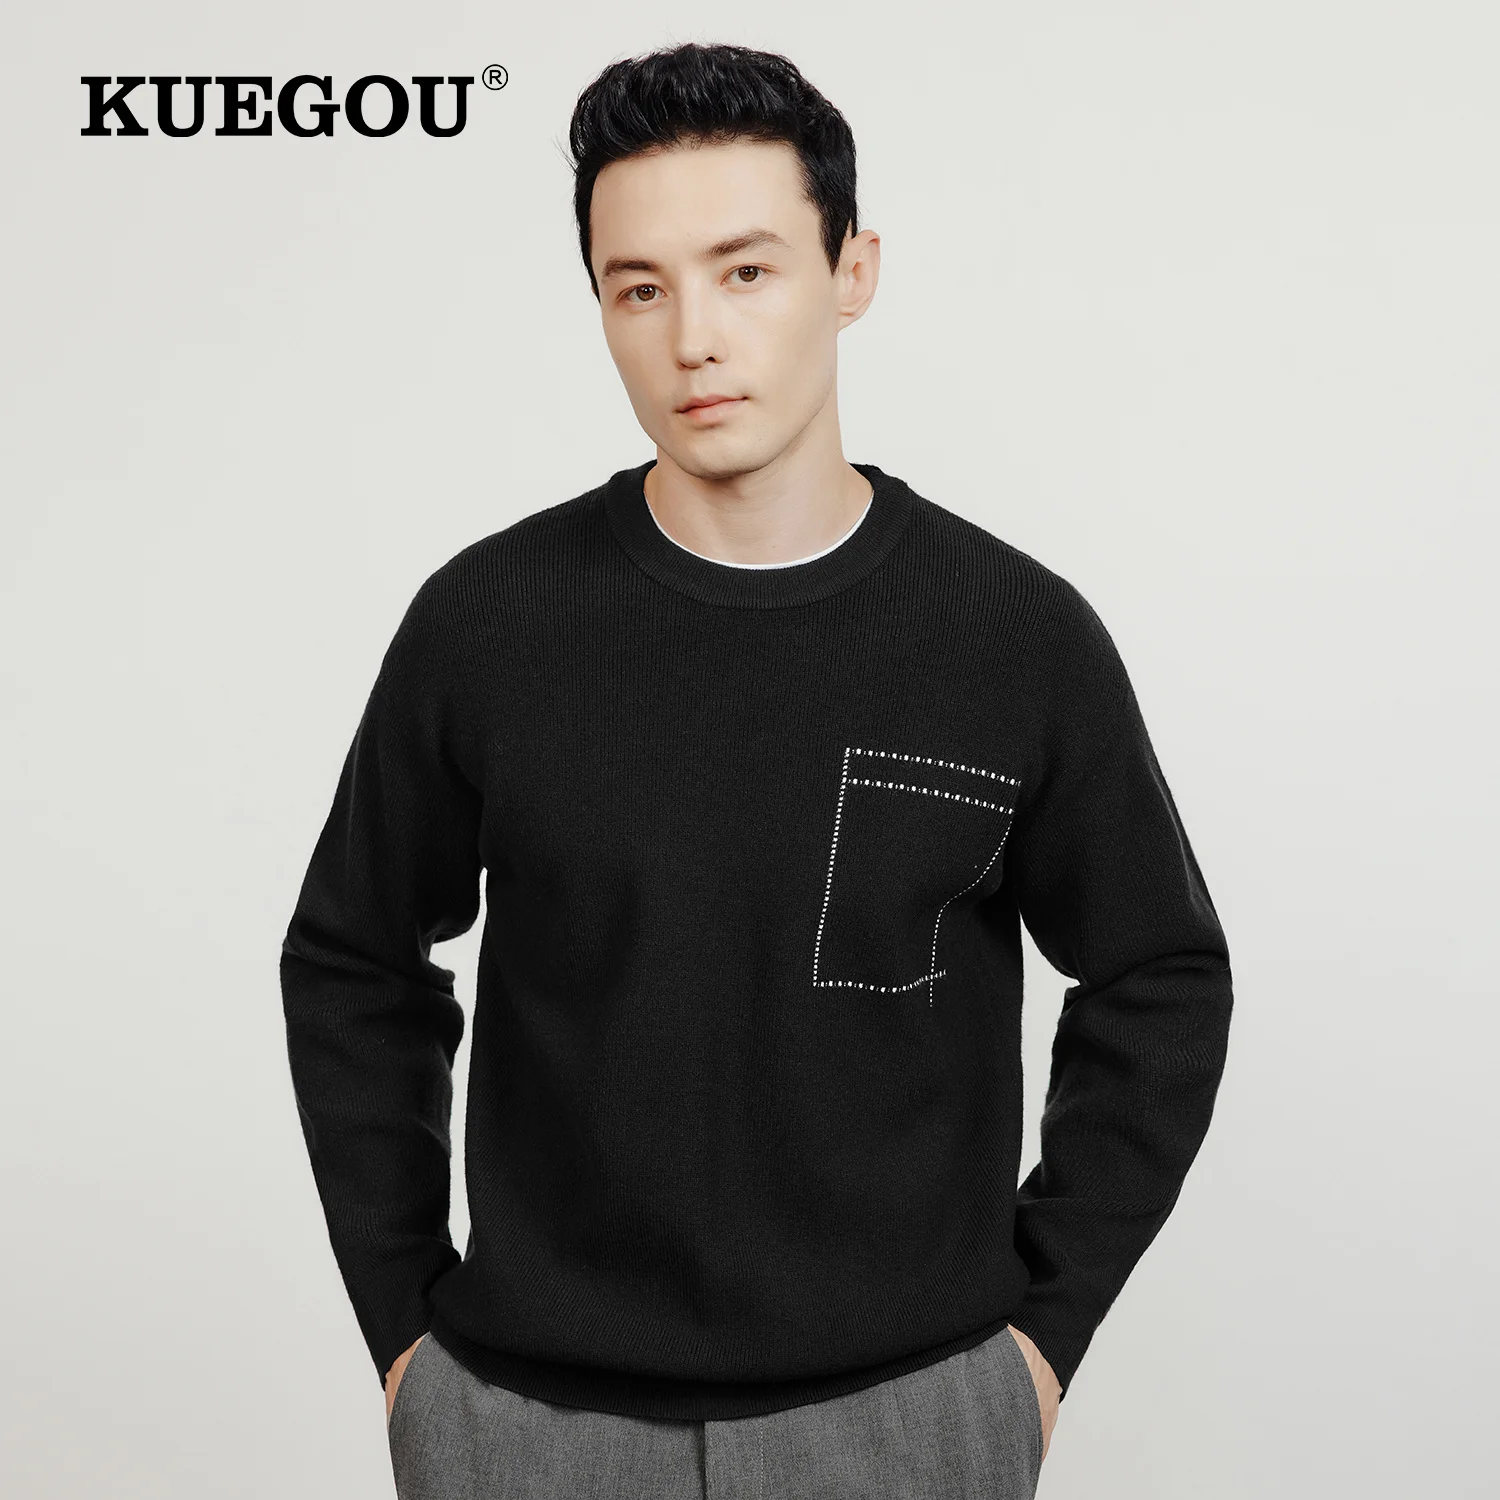 KUEGOU 2022 Autumn Plain Black Sweater Geometric Men Pullover fashion Casual Jumper For Male Wear Brand Knitted Clothes 92016